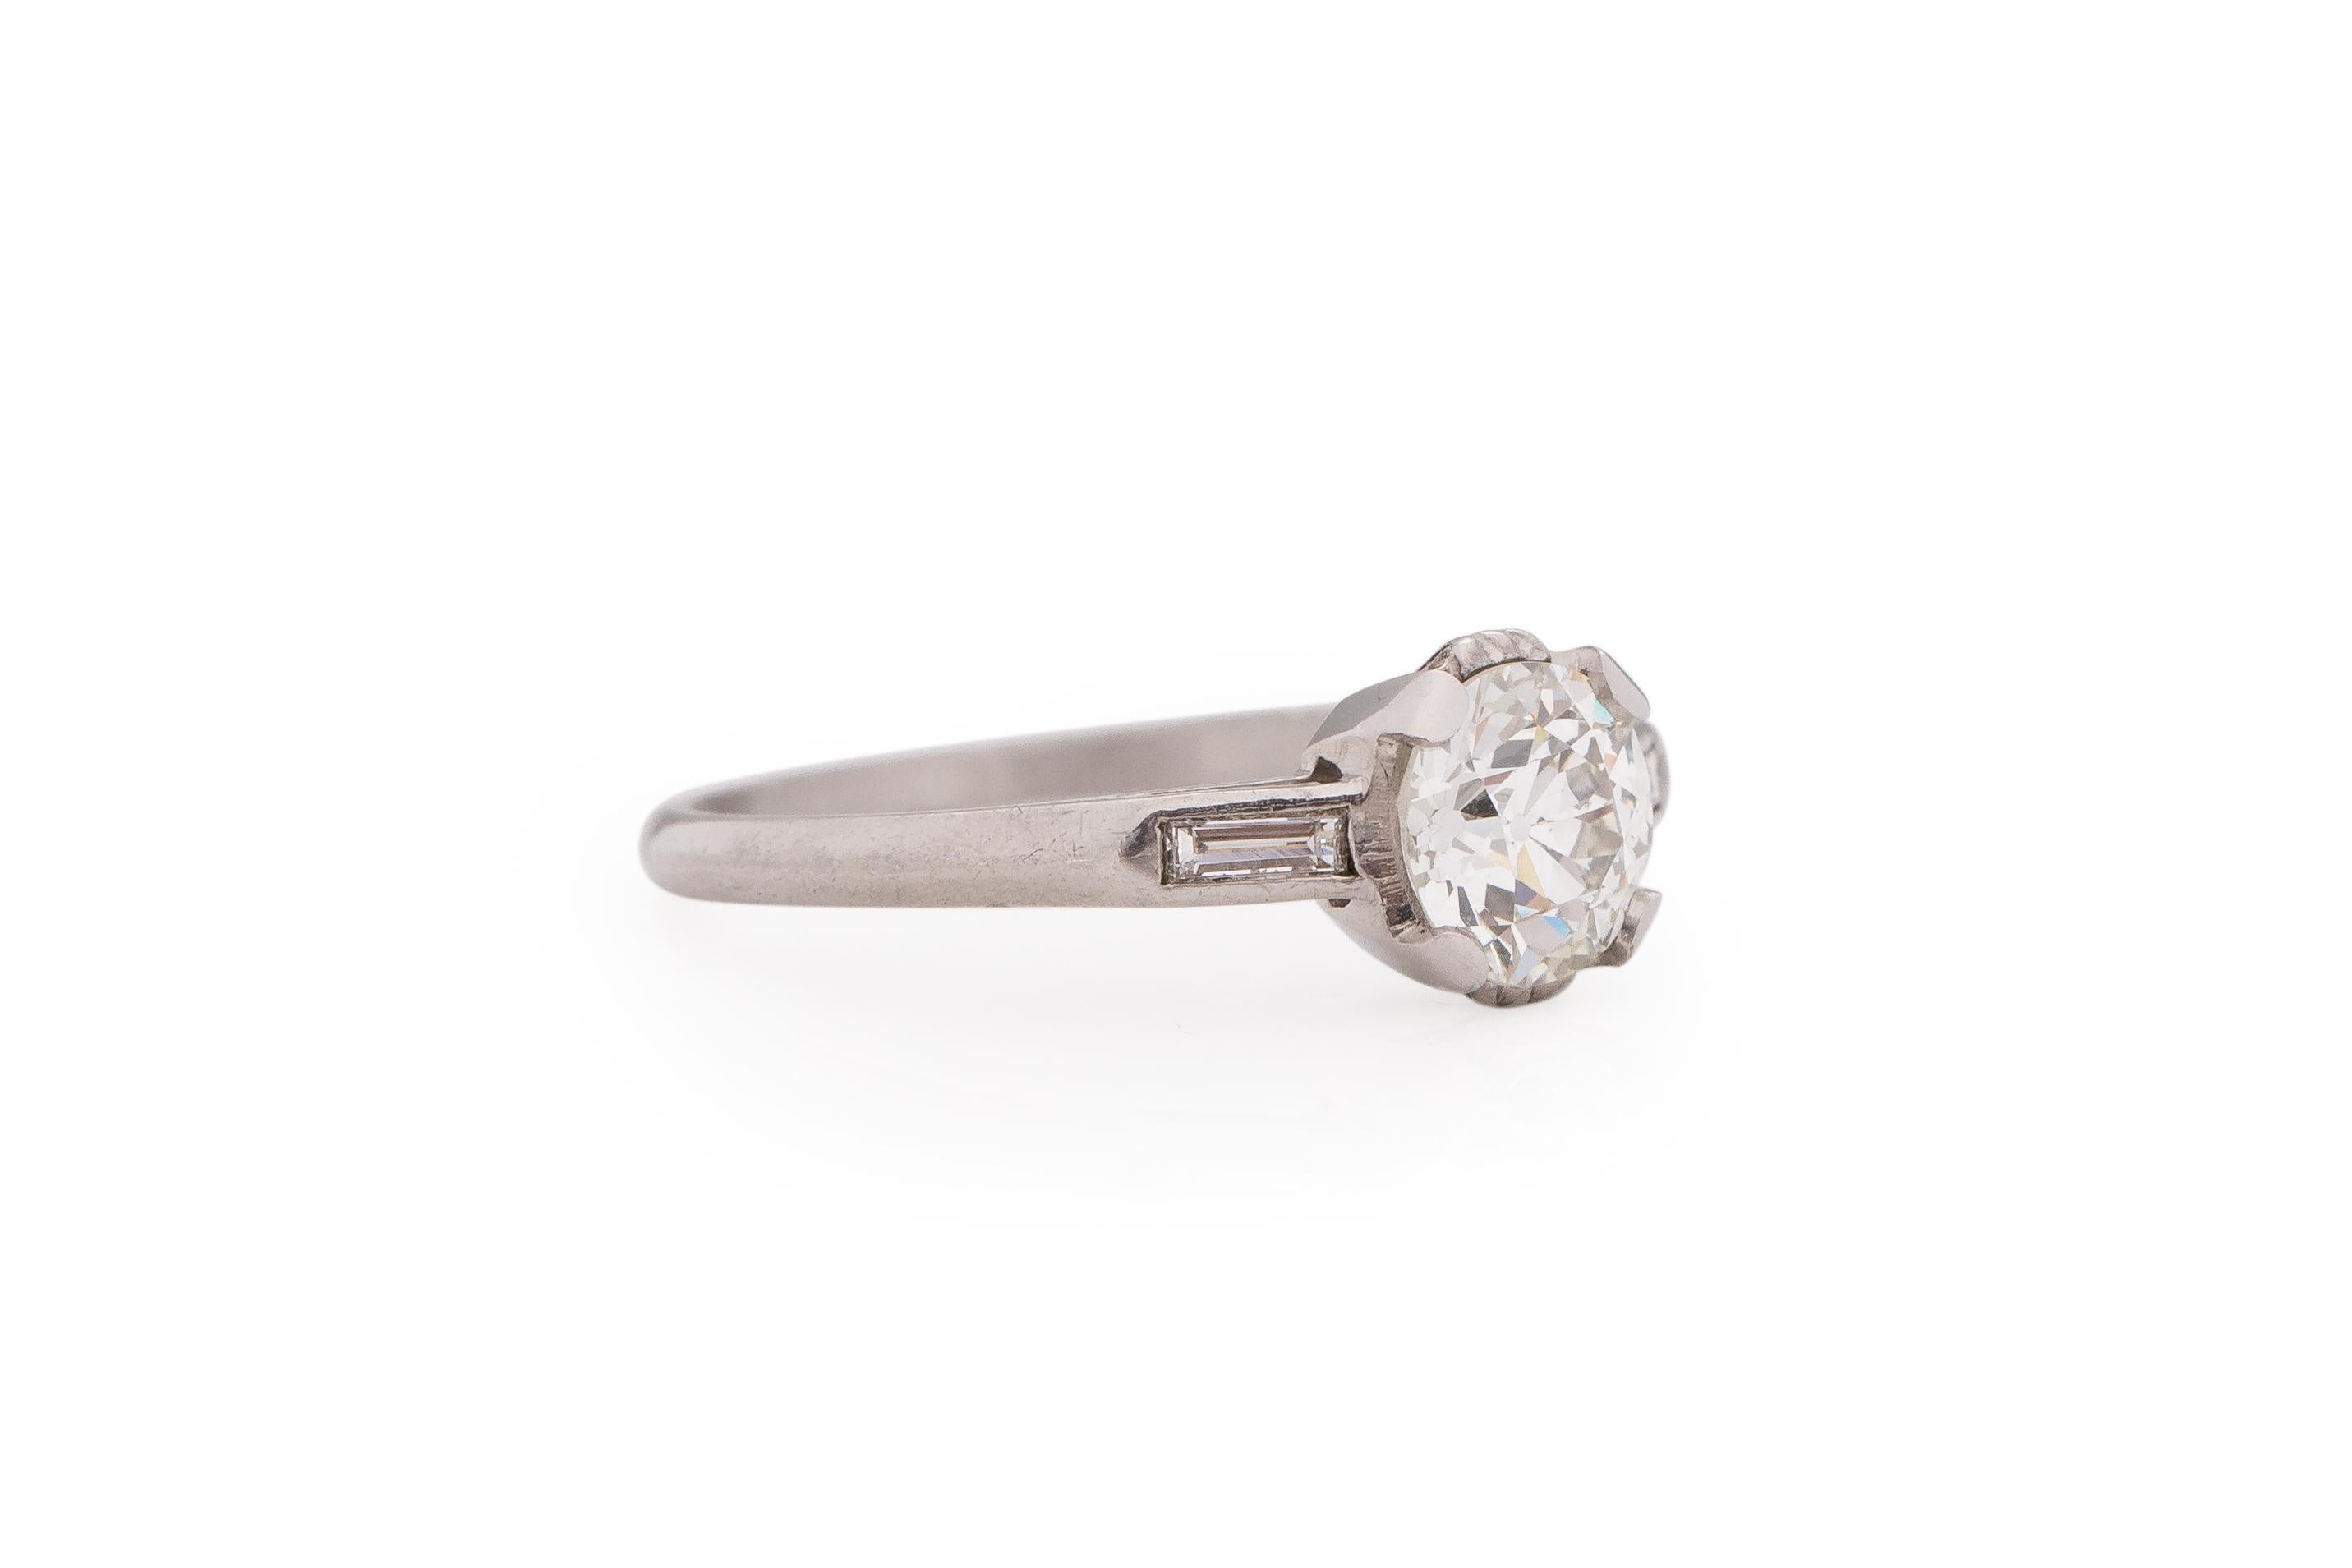 Ring Size: 7
Metal Type: Platinum [Hallmarked, and Tested]
Weight: 3.2 grams

Center Diamond Details:
GIA REPORT #: 2215236425
Weight: 1.02 carat
Cut: Old European brilliant
Color: J
Clarity: VS1

Side Stone Details:
Weight: .15 carat total